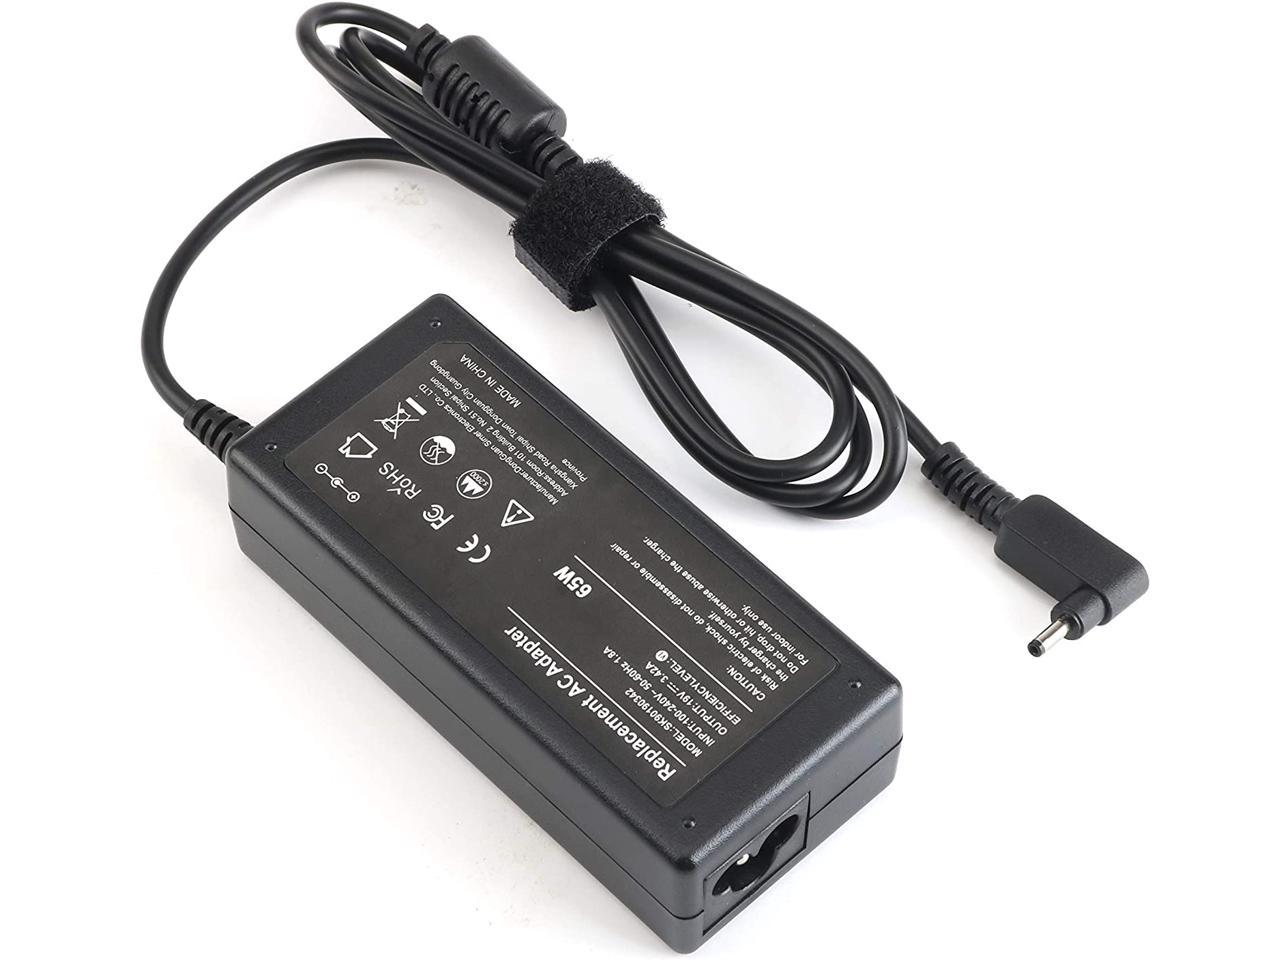 19V 3.42A 65W AC Adapter Charger for Acer Chromebook 11 R11 13 14 15 C720 C720P C738T C740 C810 C910 CB3 CB3-111 CB3-131-C3SZ CB3-431 CB3-532 CB5-311 CB5-571;Acer Iconia W700 W700P Laptop Supply Cord